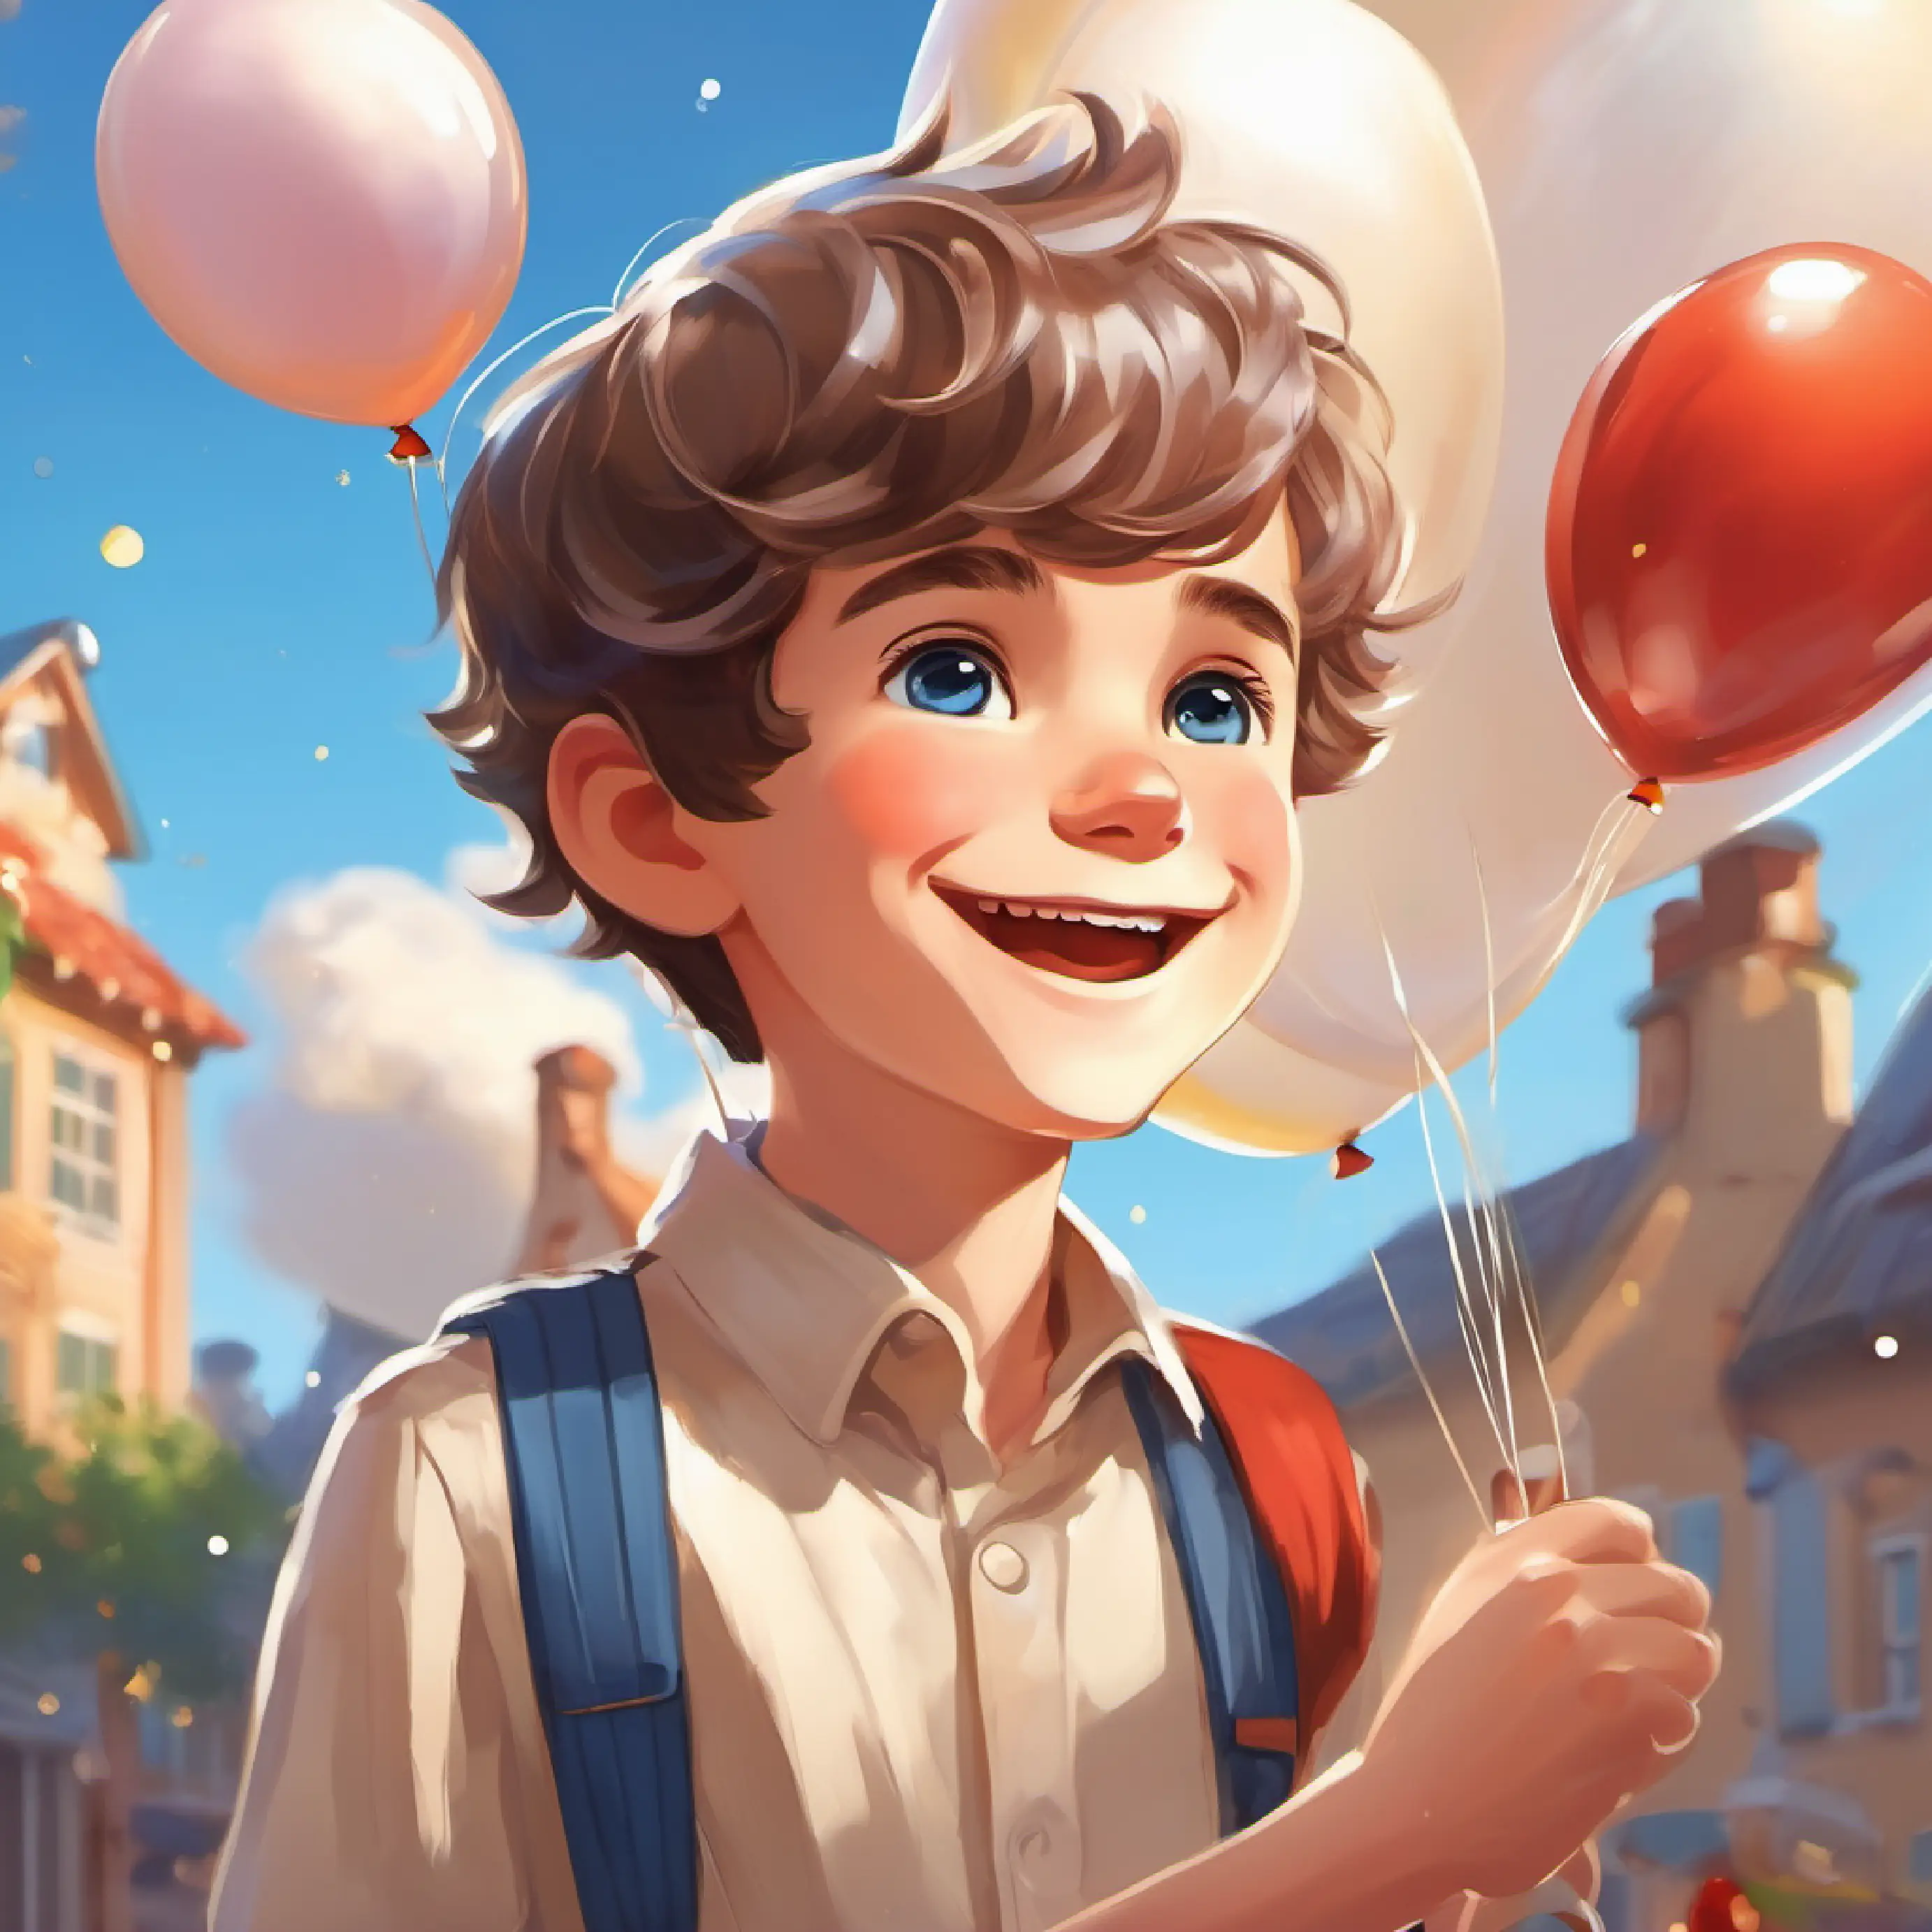 Cheerful boy, short brown hair, sparkling blue eyes cheers up Jovial baker, white hair, kind brown eyes with a 'sunshine' balloon